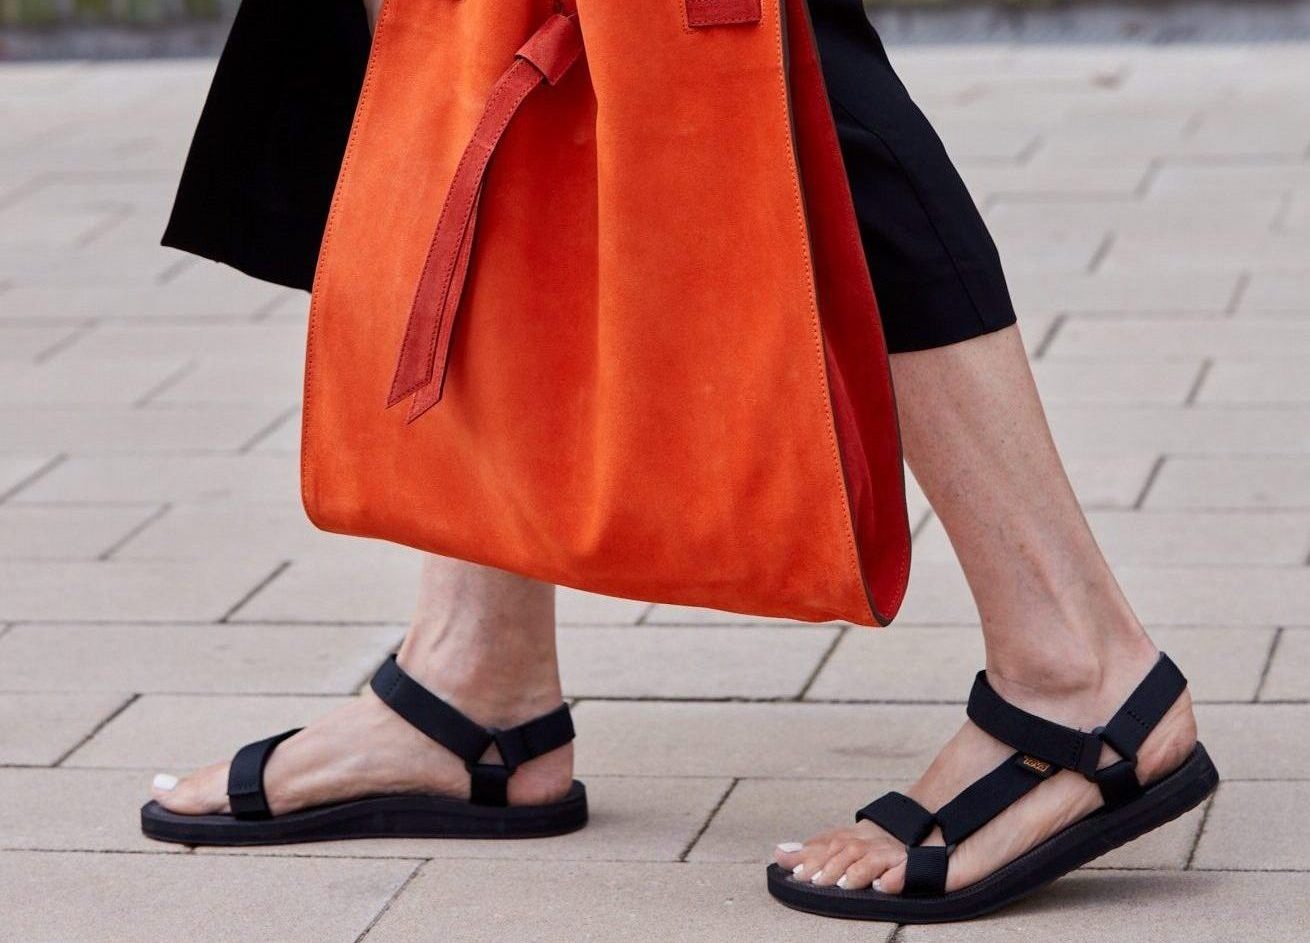 Are Sandals Bad for Your Feet? Maybe, Maybe Not - University